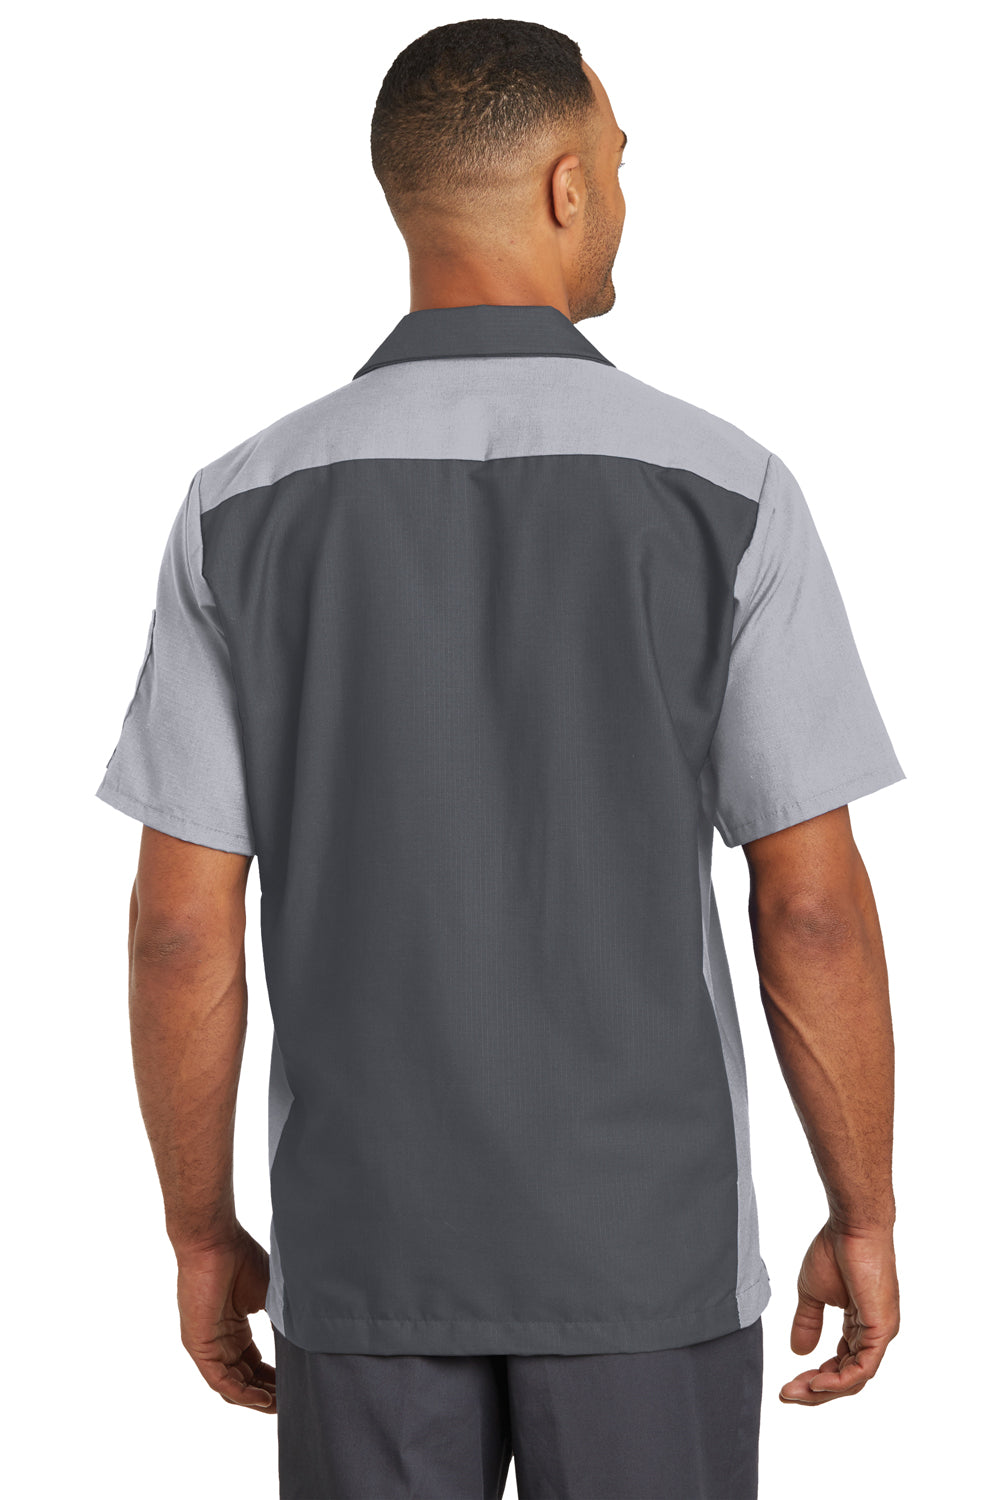 Red Kap SY20 Mens Crew Moisture Wicking Short Sleeve Button Down Shirt w/ Double Pockets Charcoal Grey/Light Grey Back